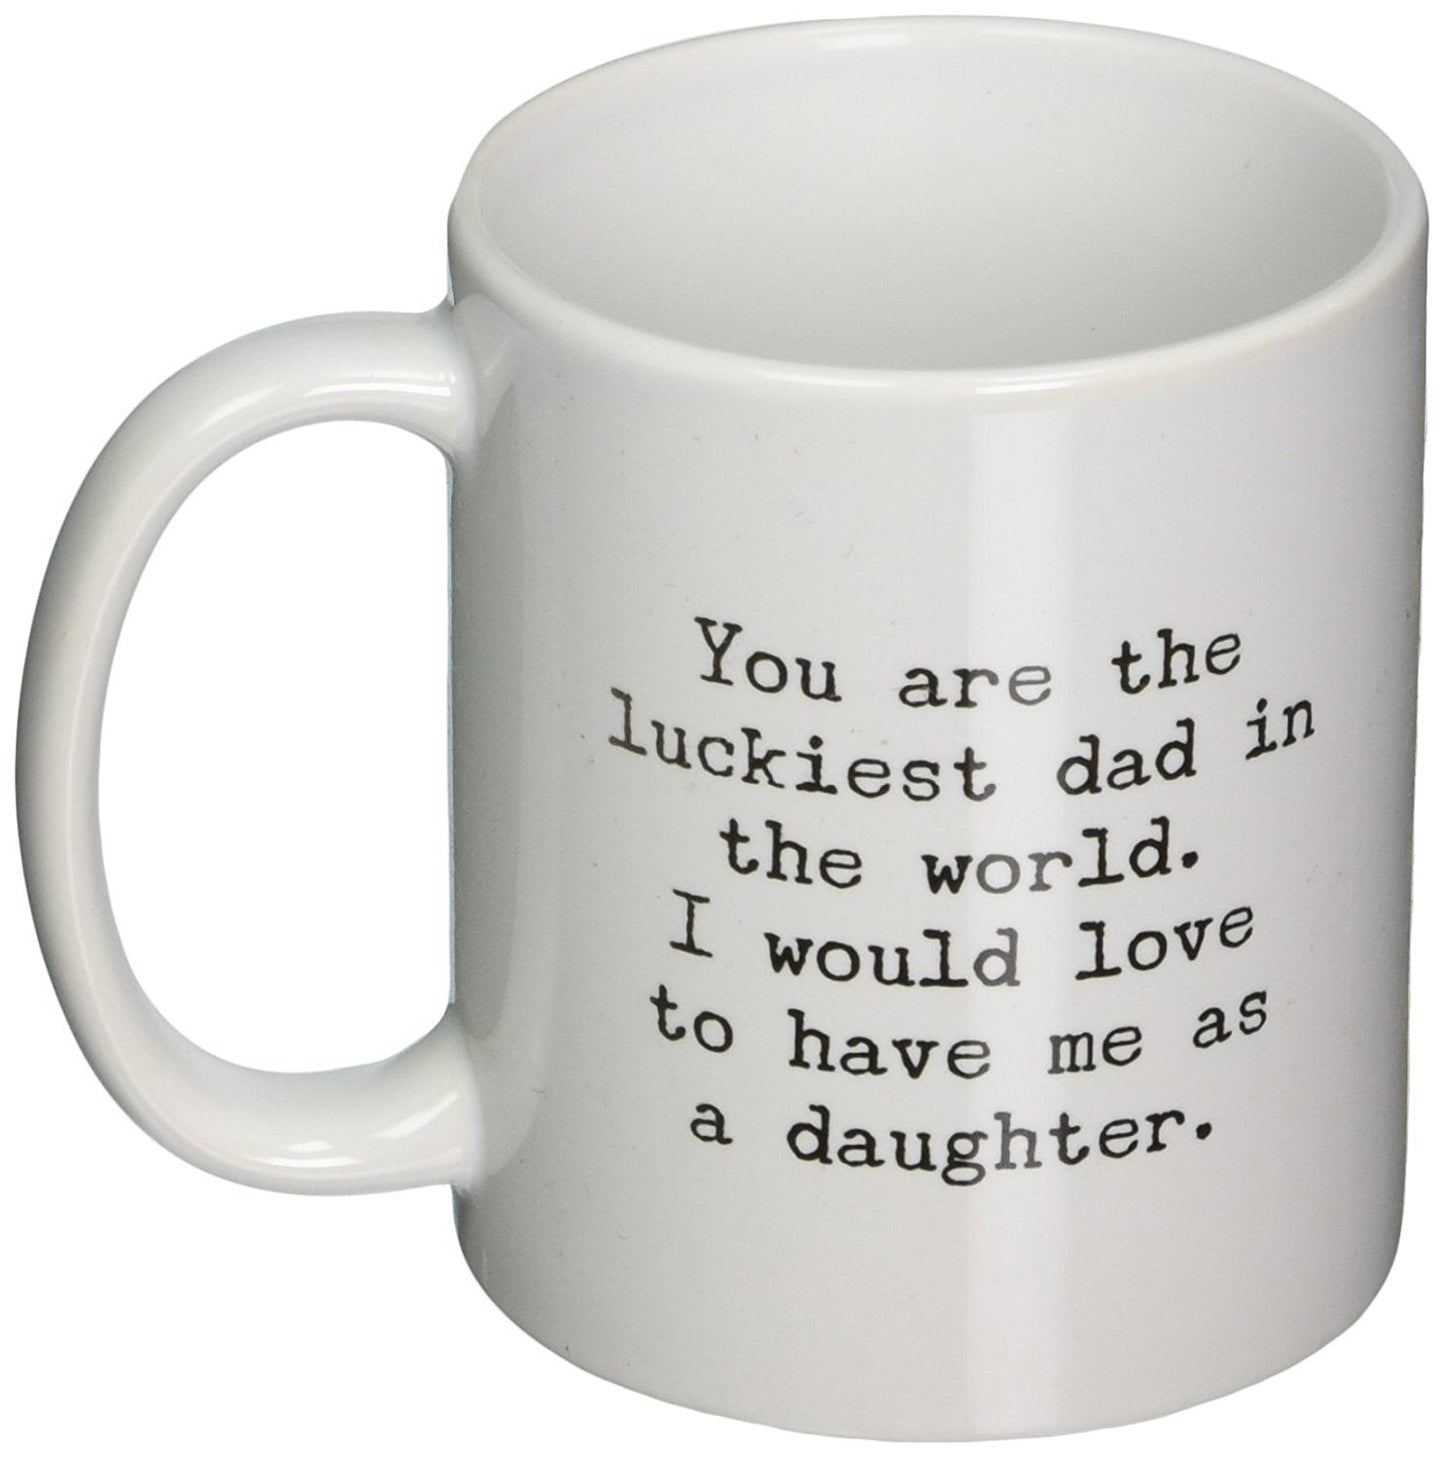 Funny Mug for Dad - You Are the Luckiest Dad in the World - Sarcastic Coffee Mug Gift for Dad From Daughter